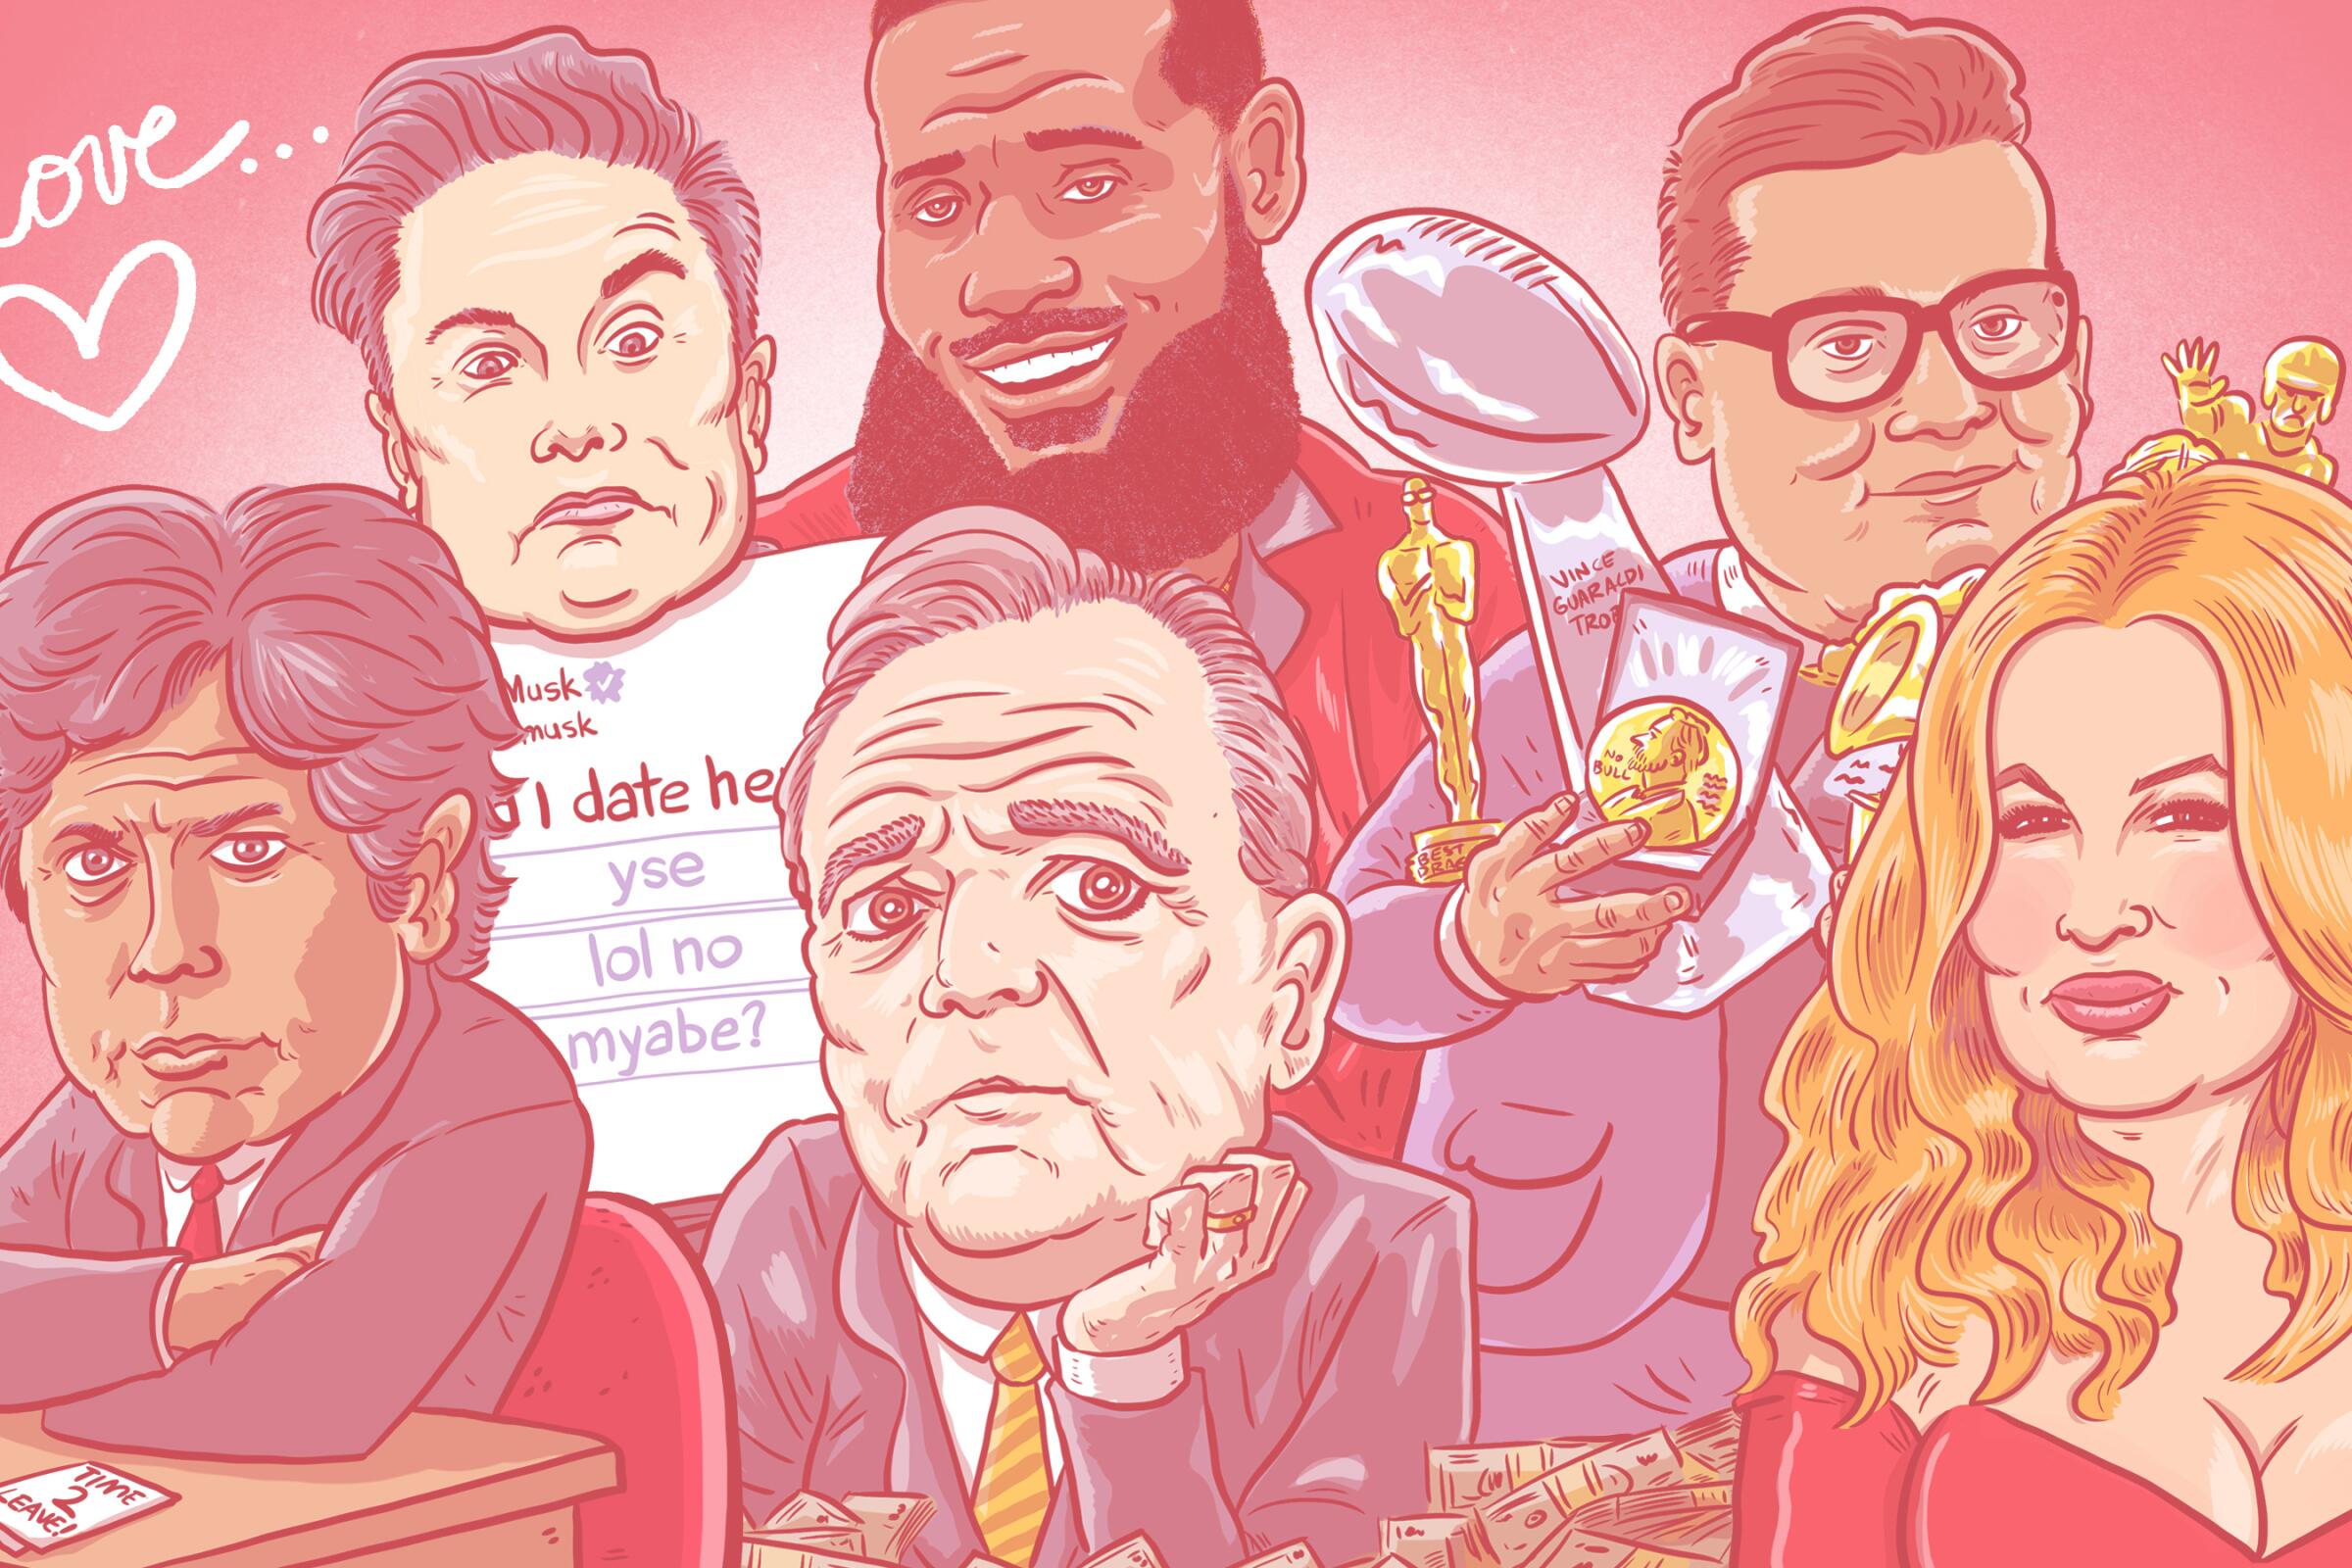 Illustrated collage of celebrities and politicians, including LeBron, Caruso, Jennifer Coolidge, KDL, Musk, George Santos